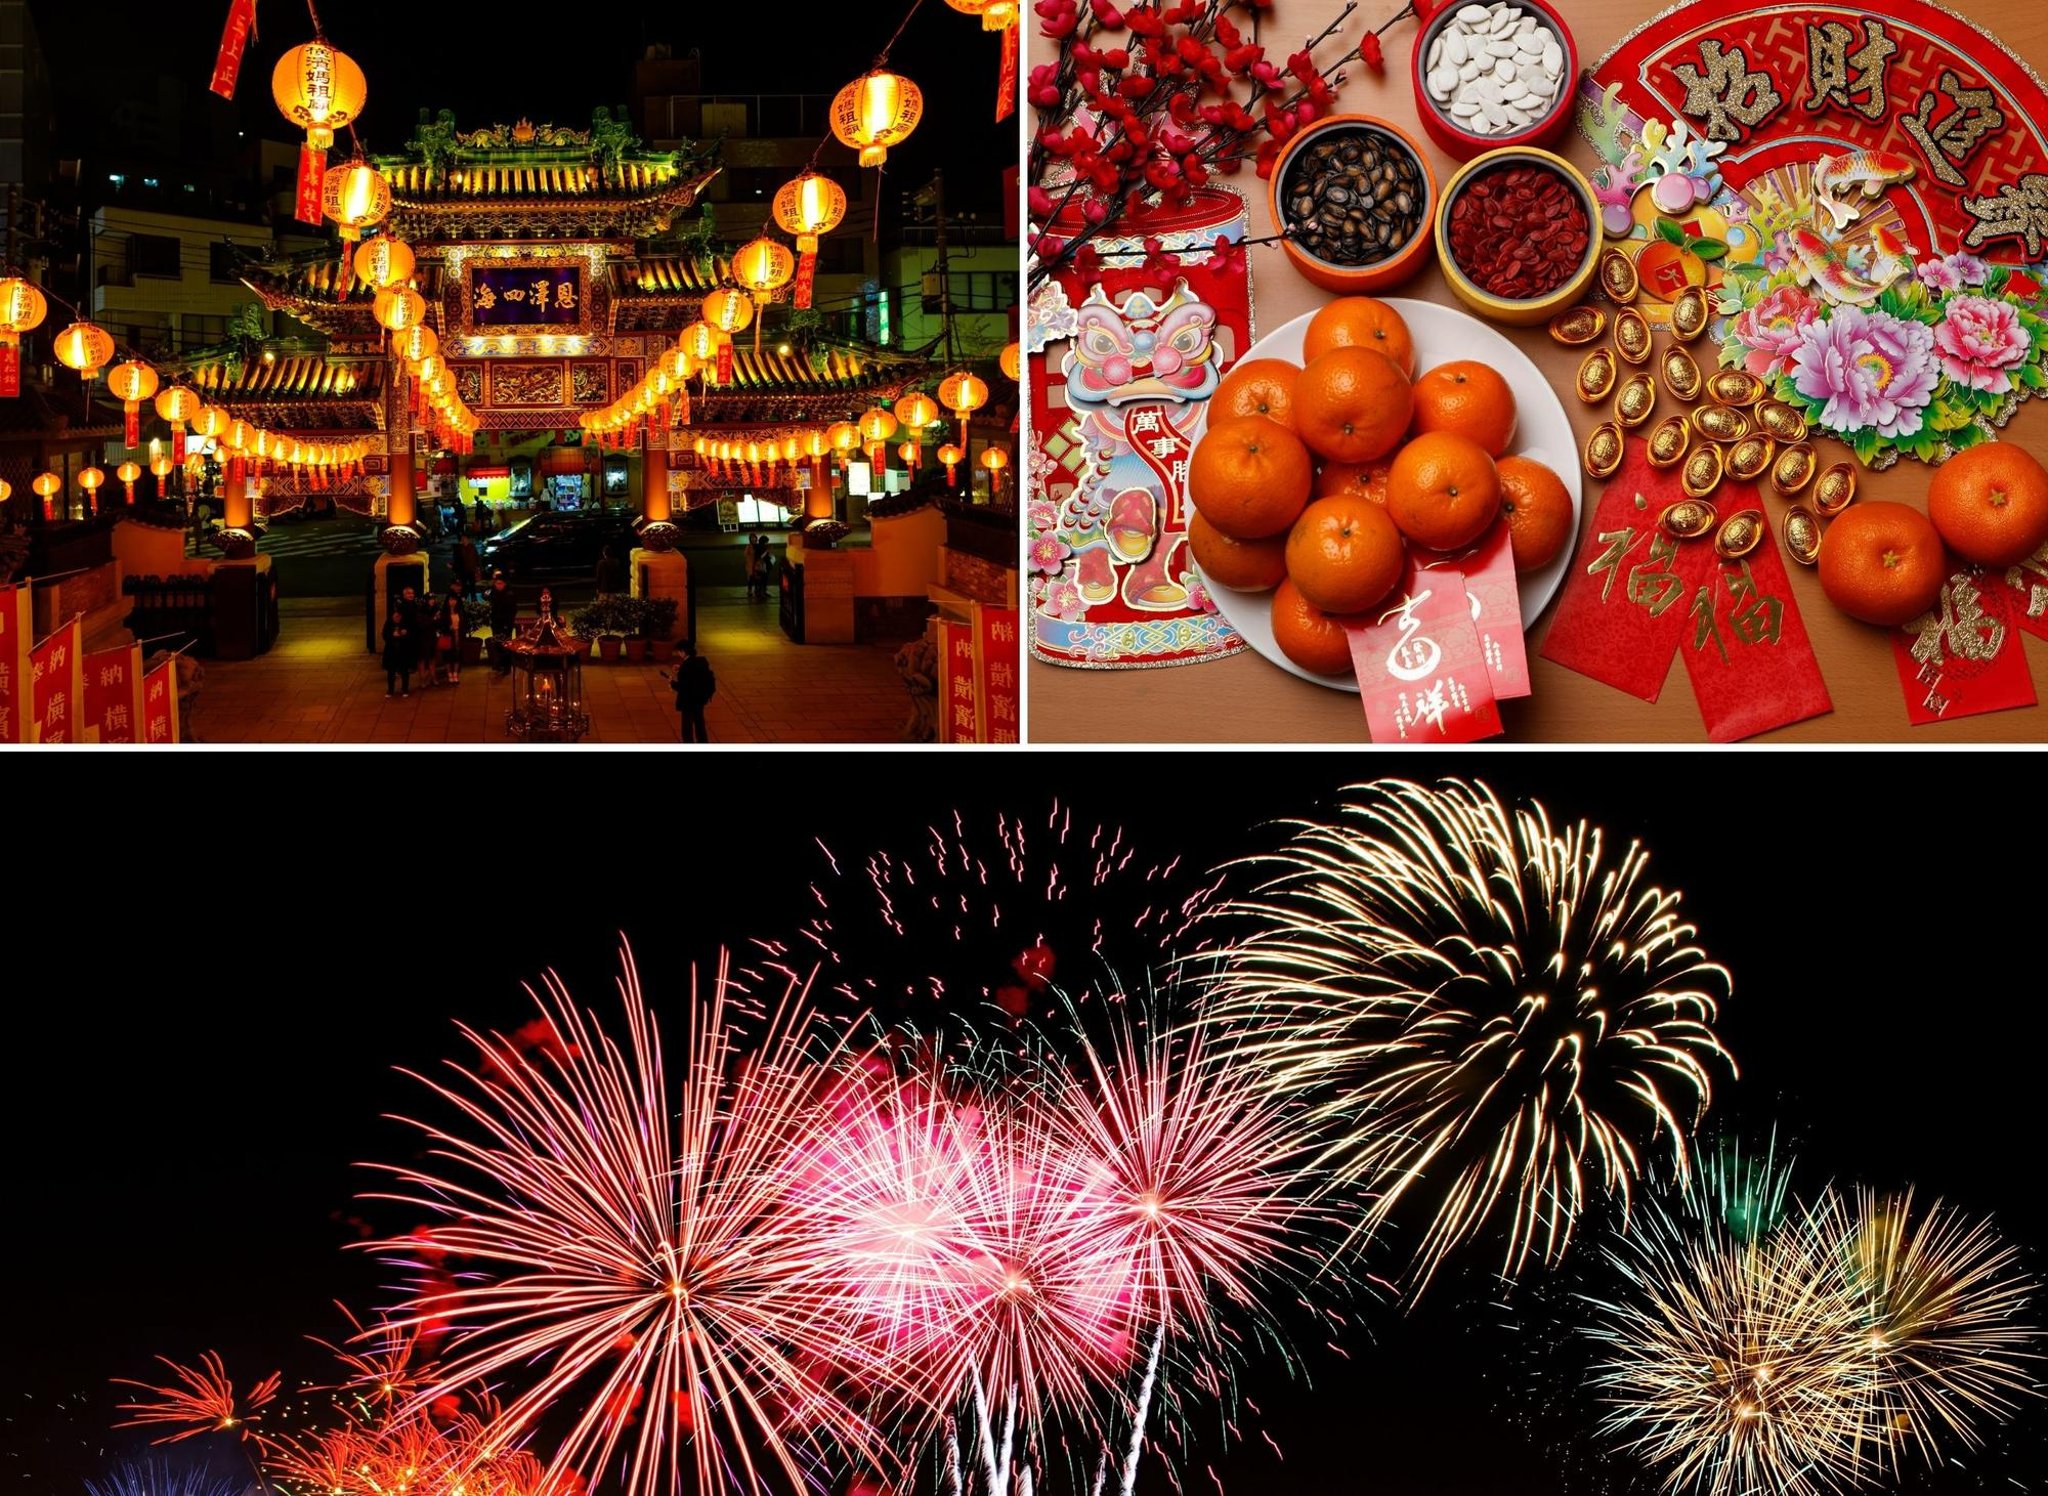 Chinese new year 2022 images